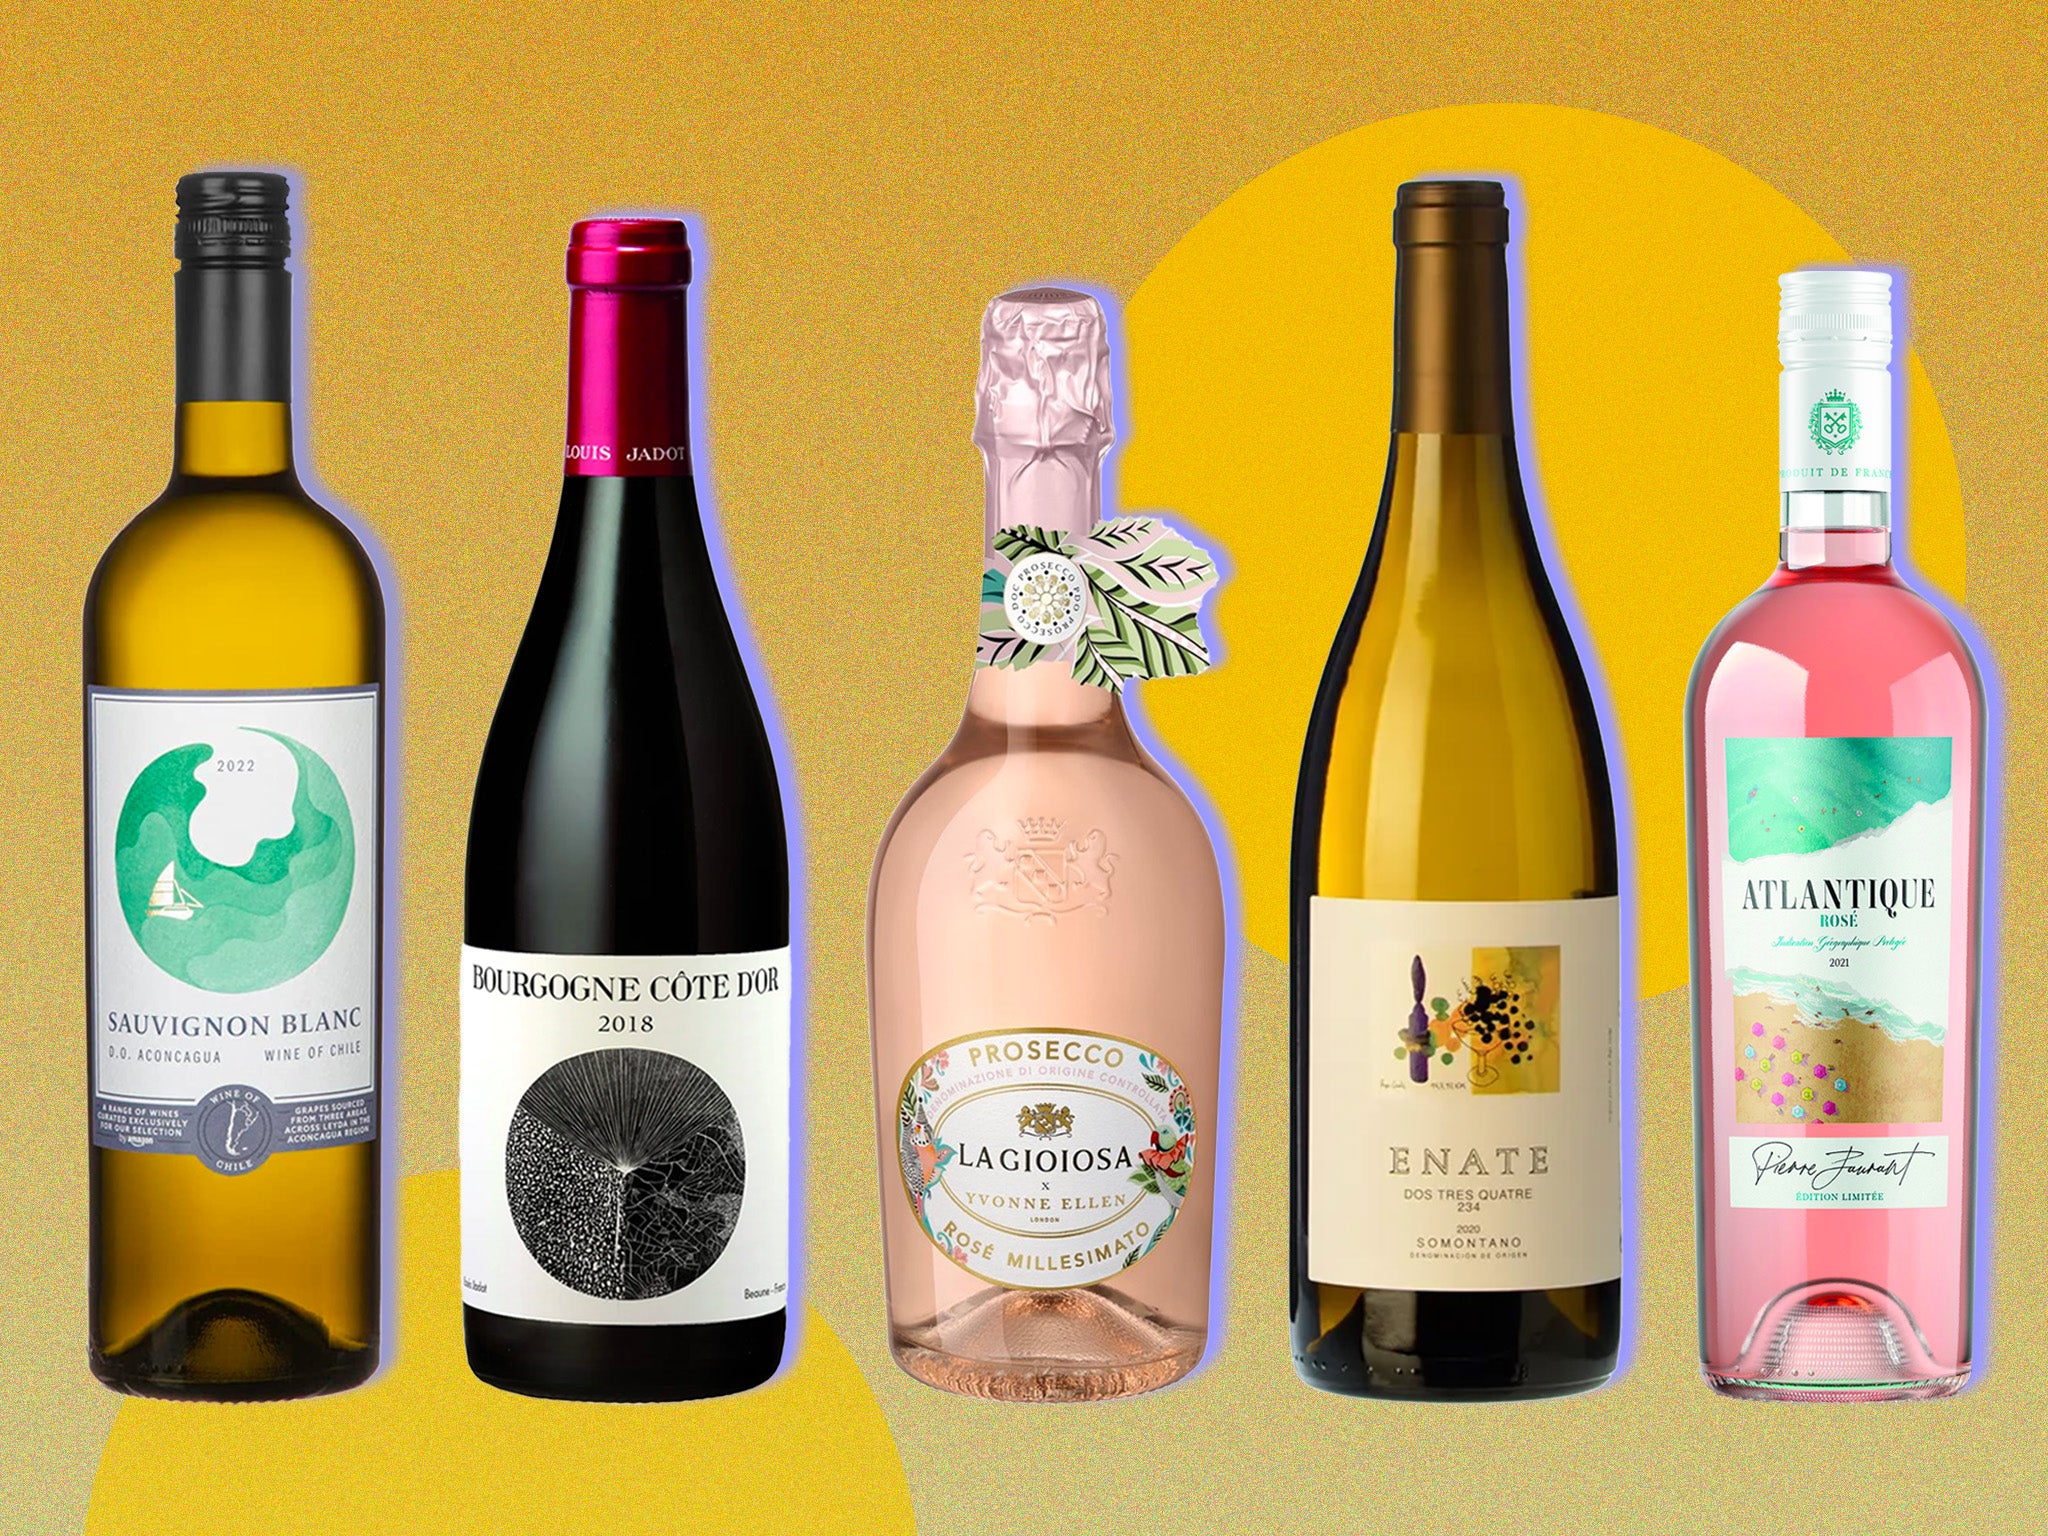 We’ve featured both purse-friendly and luxury wines to pop a cork with this year